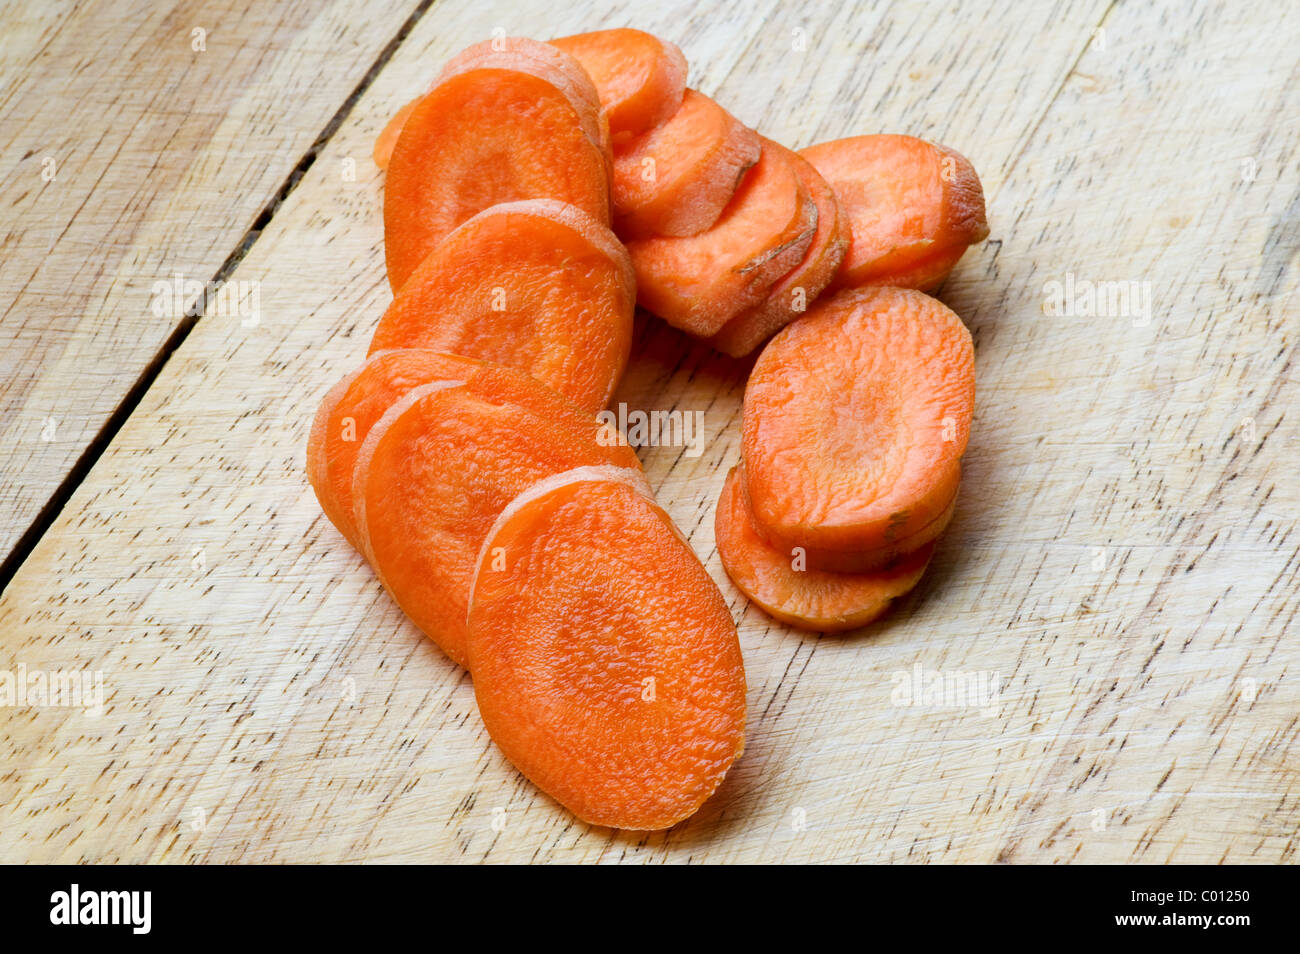 object on white - carrot on a cutting board Stock Photo